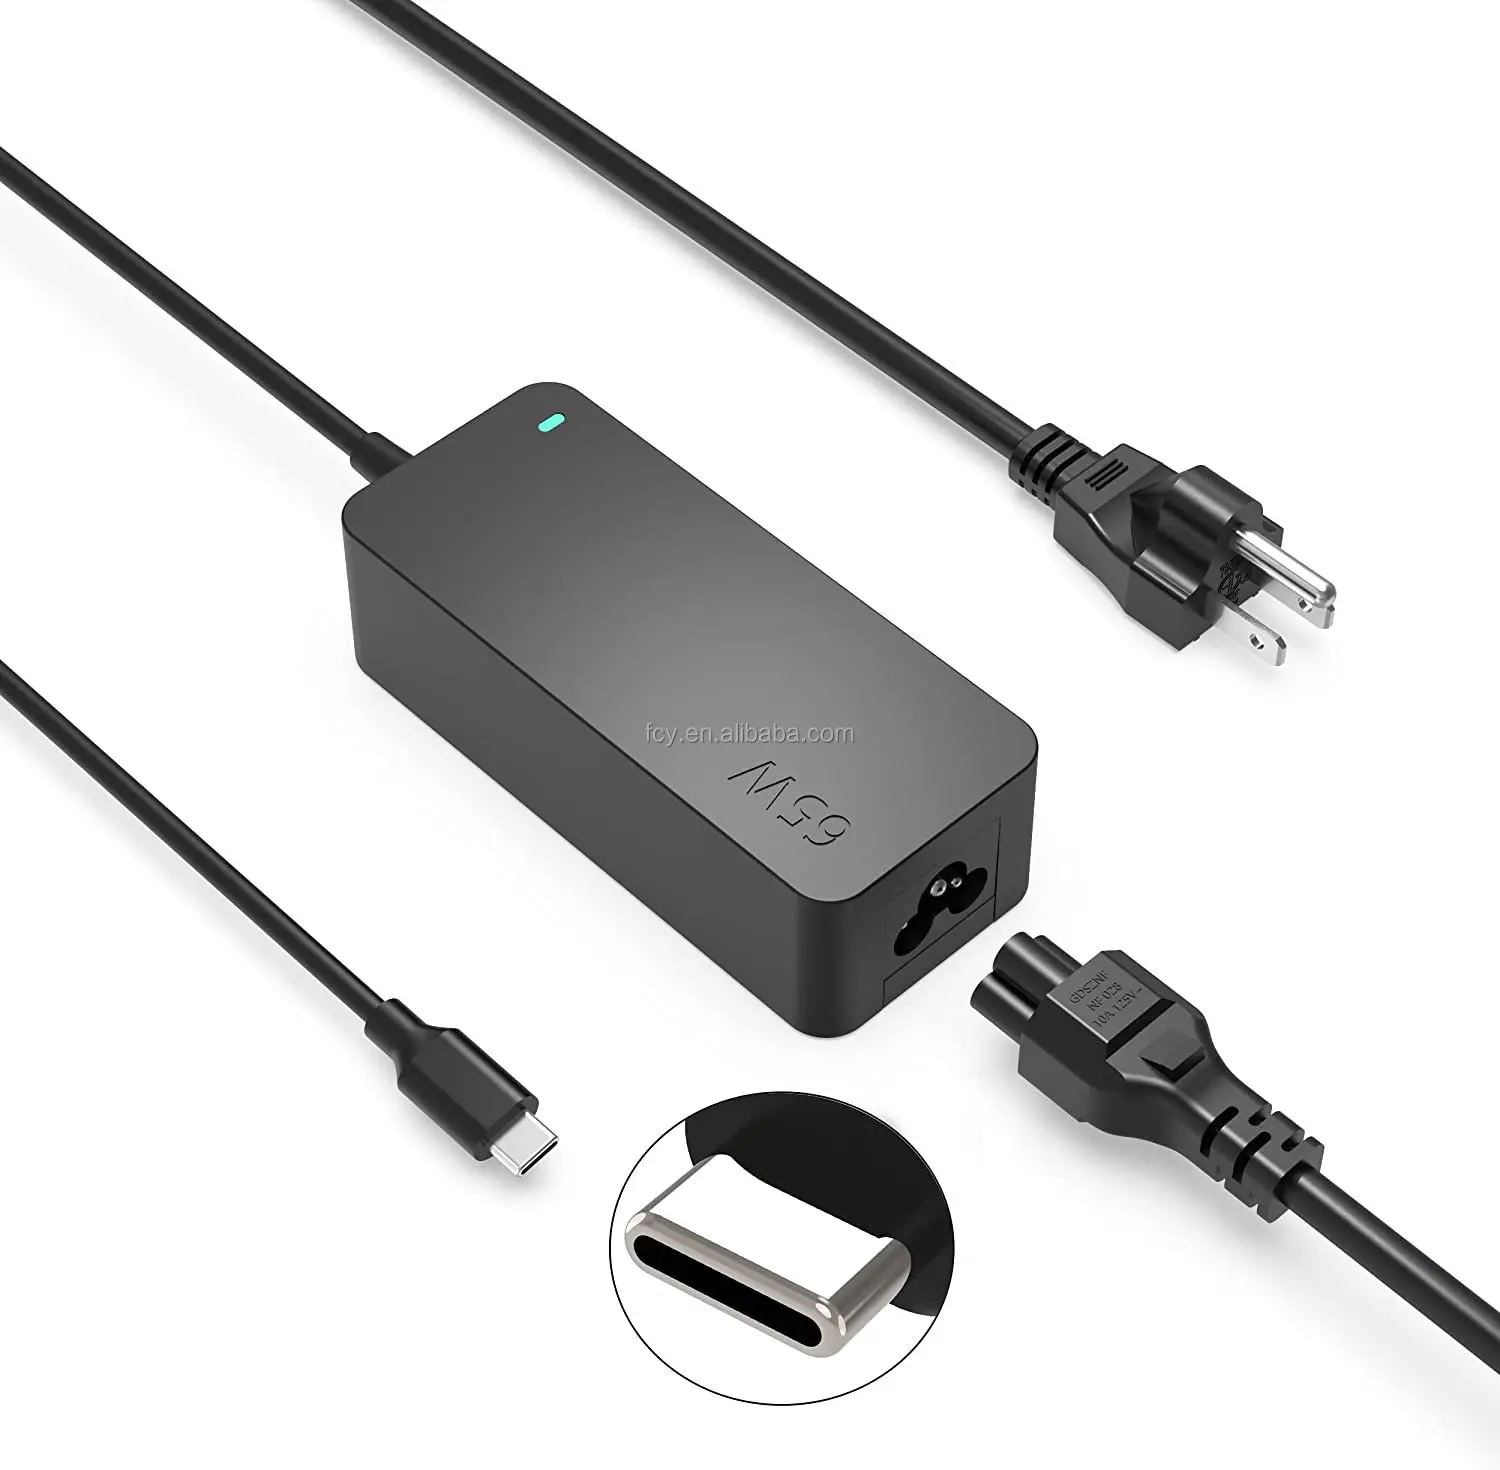 

Hot Sale 65W 20V 3.25A Universal USB Type C PD Laptop Adapter Charger For APPLE DELL HP LENOVO ASUS ACER SAMSUNG TOSHIBA